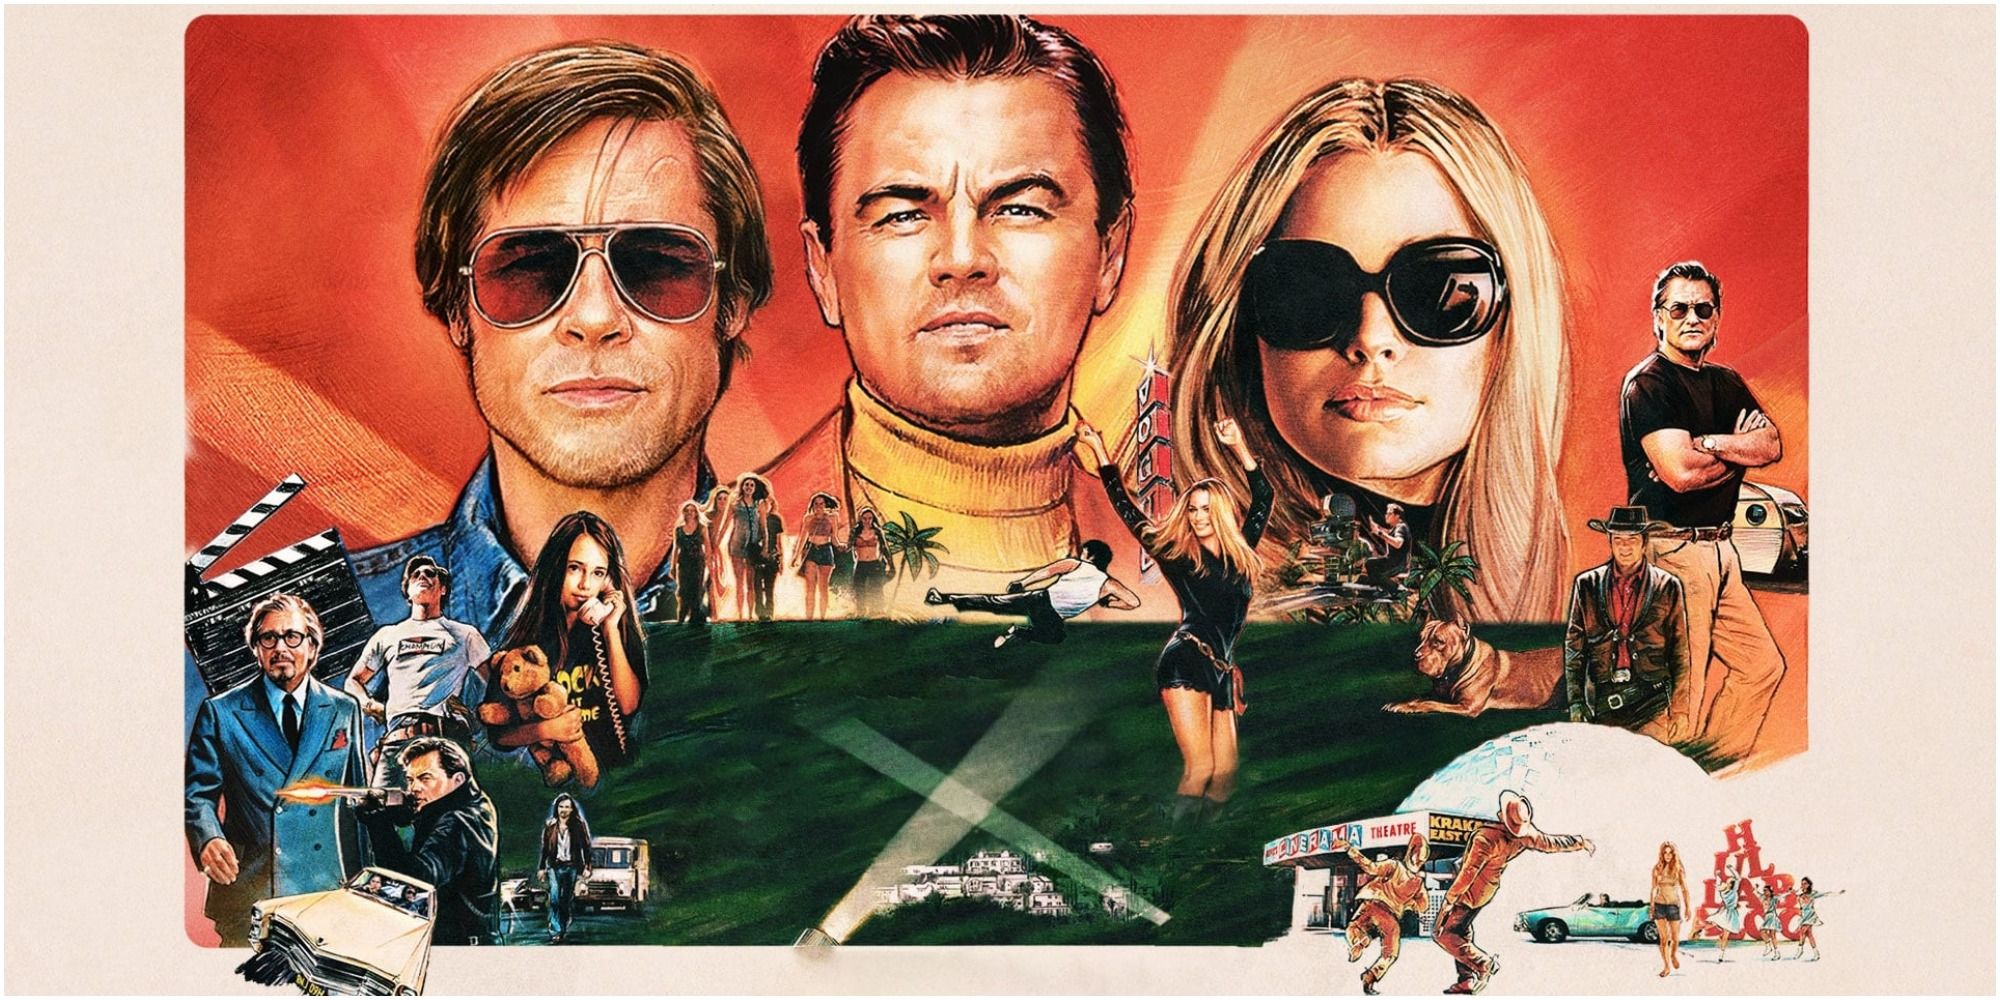 Once Upon a Time in Hollywood Poster Featured Image